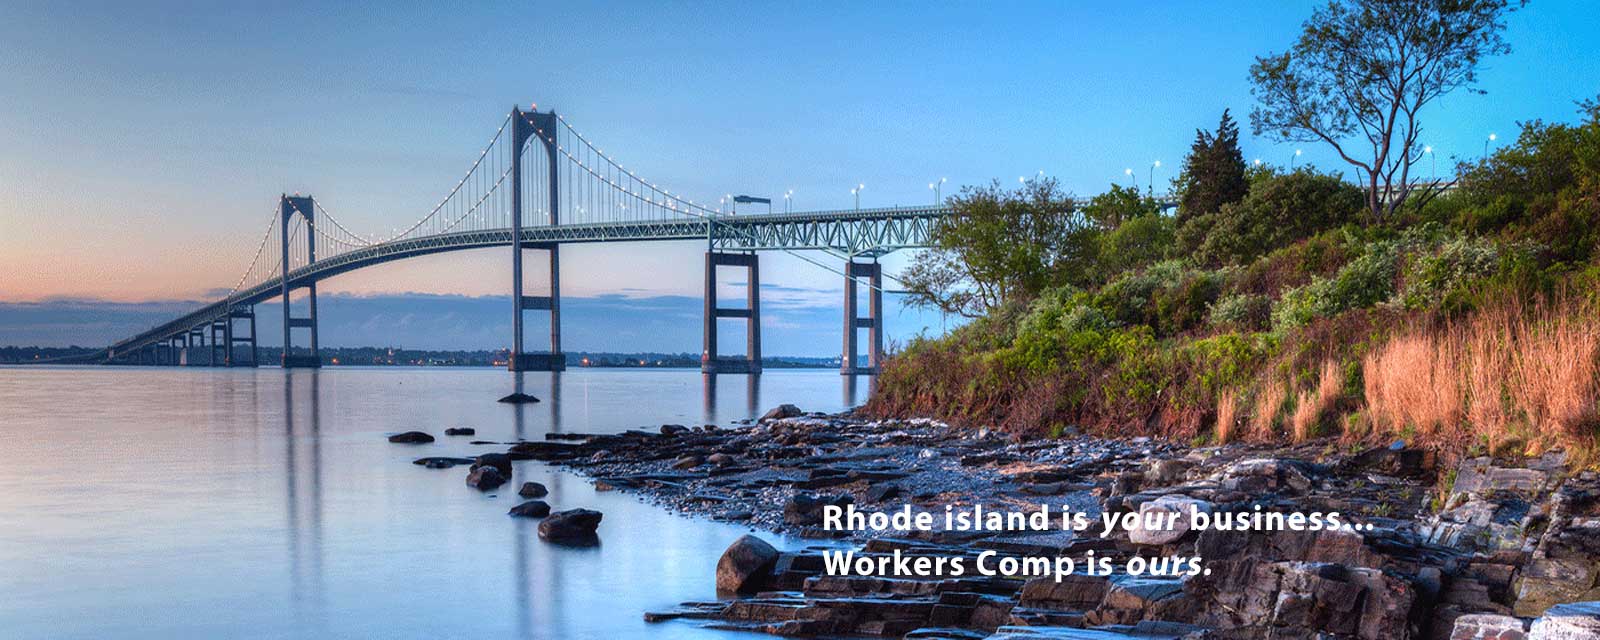 Rhode Island Workers Compnsurance - Workers Compensation Quotes Online